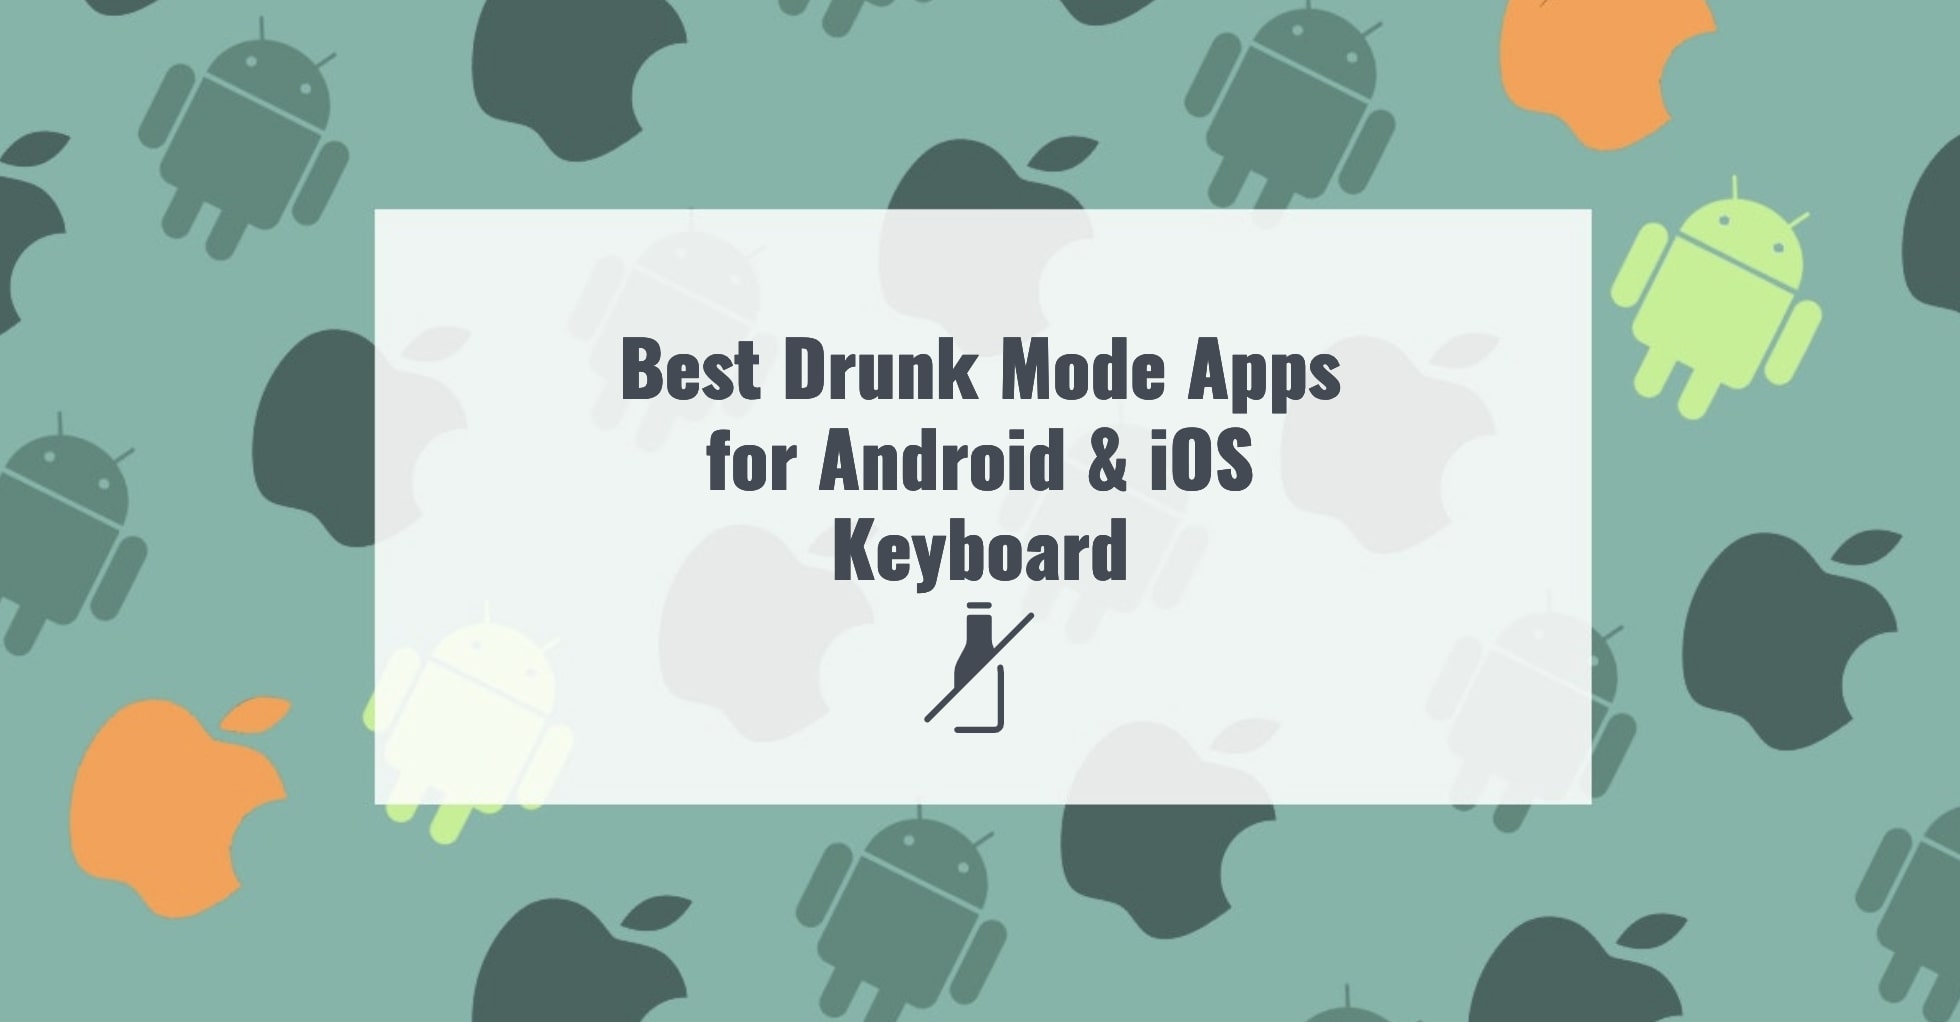 7 Best Drunk Mode Apps for Android & iOS Keyboard